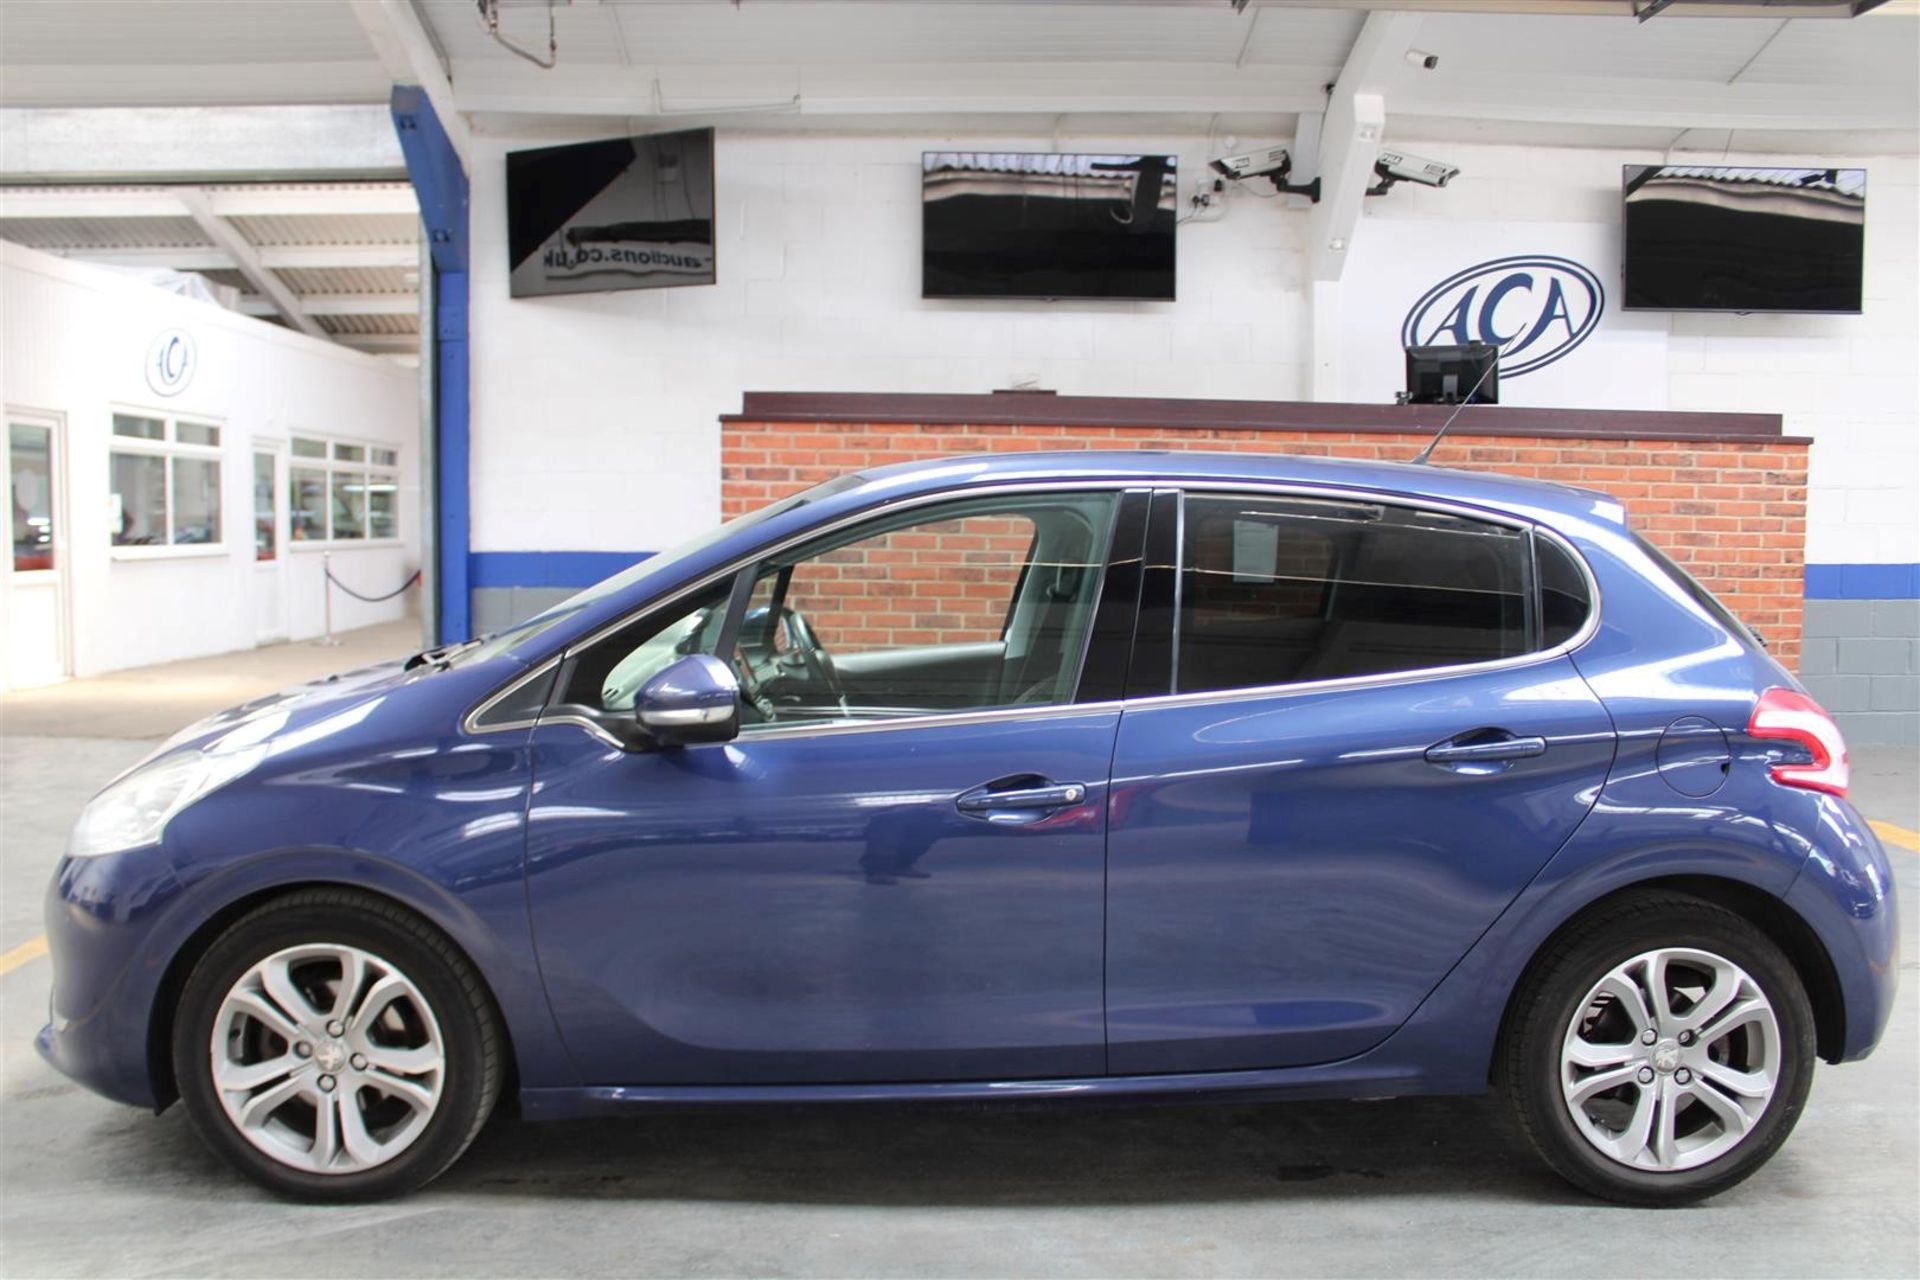 12 62 Peugeot 208 Allure E HDI 5dr - Image 35 of 35